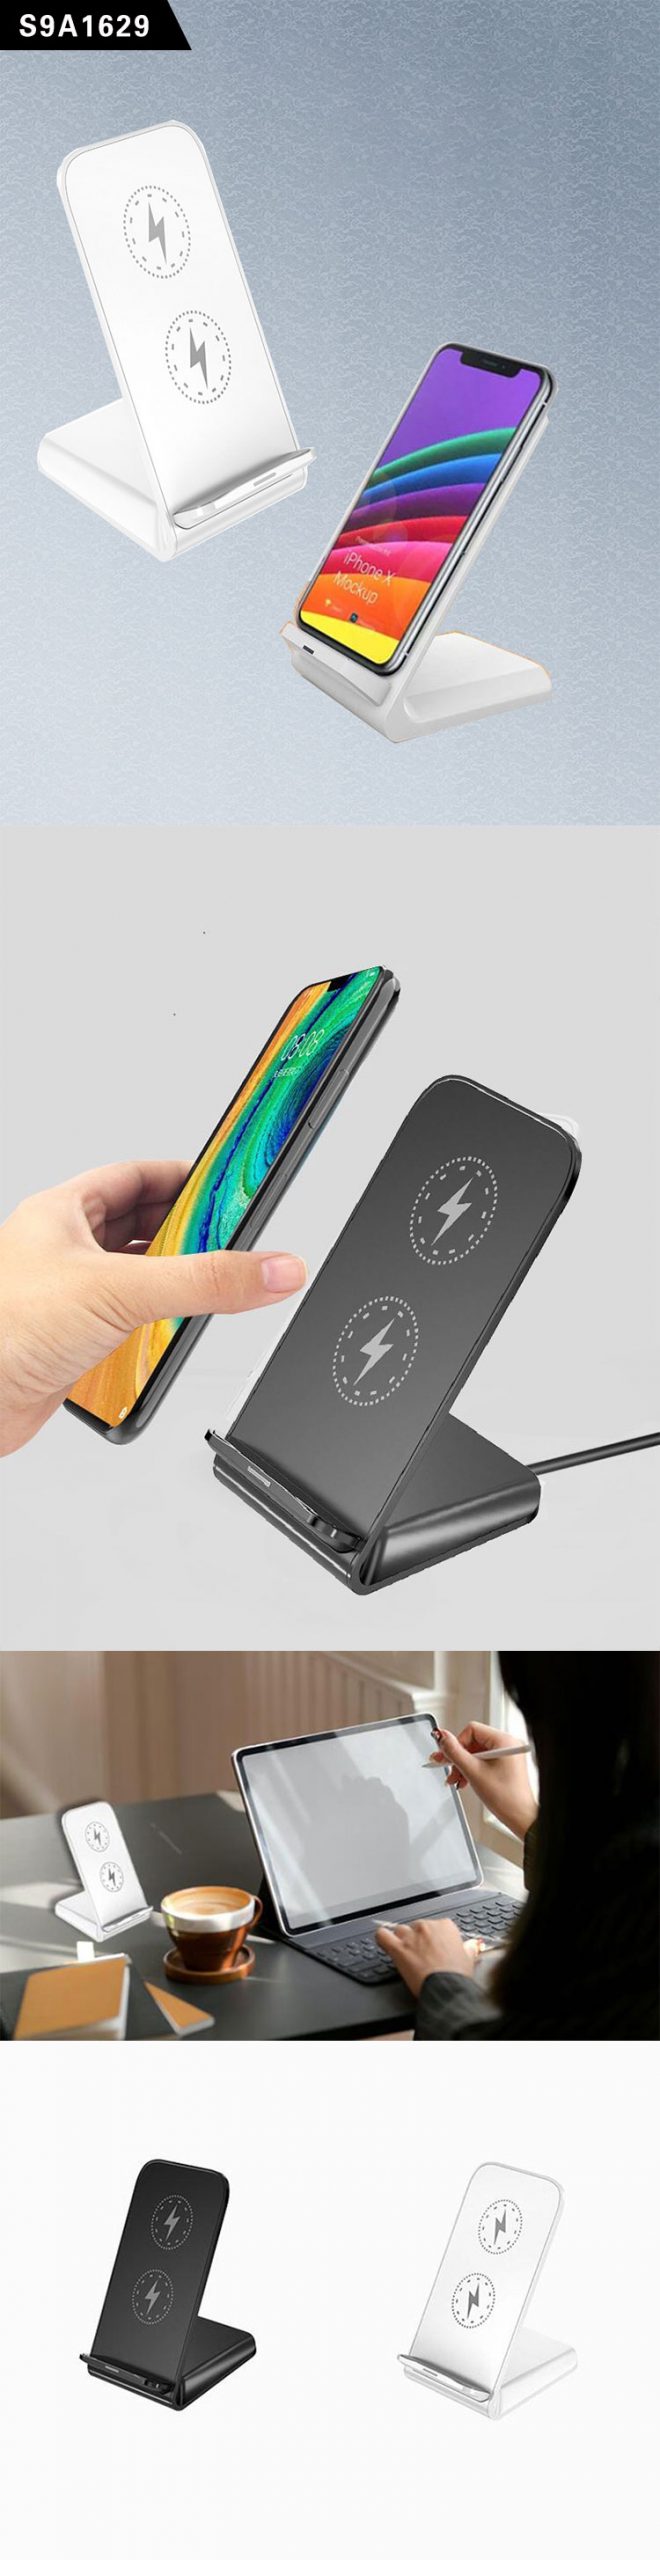 Wireless Charger Fast Charging- Free Your Mobile From Tangling Cables